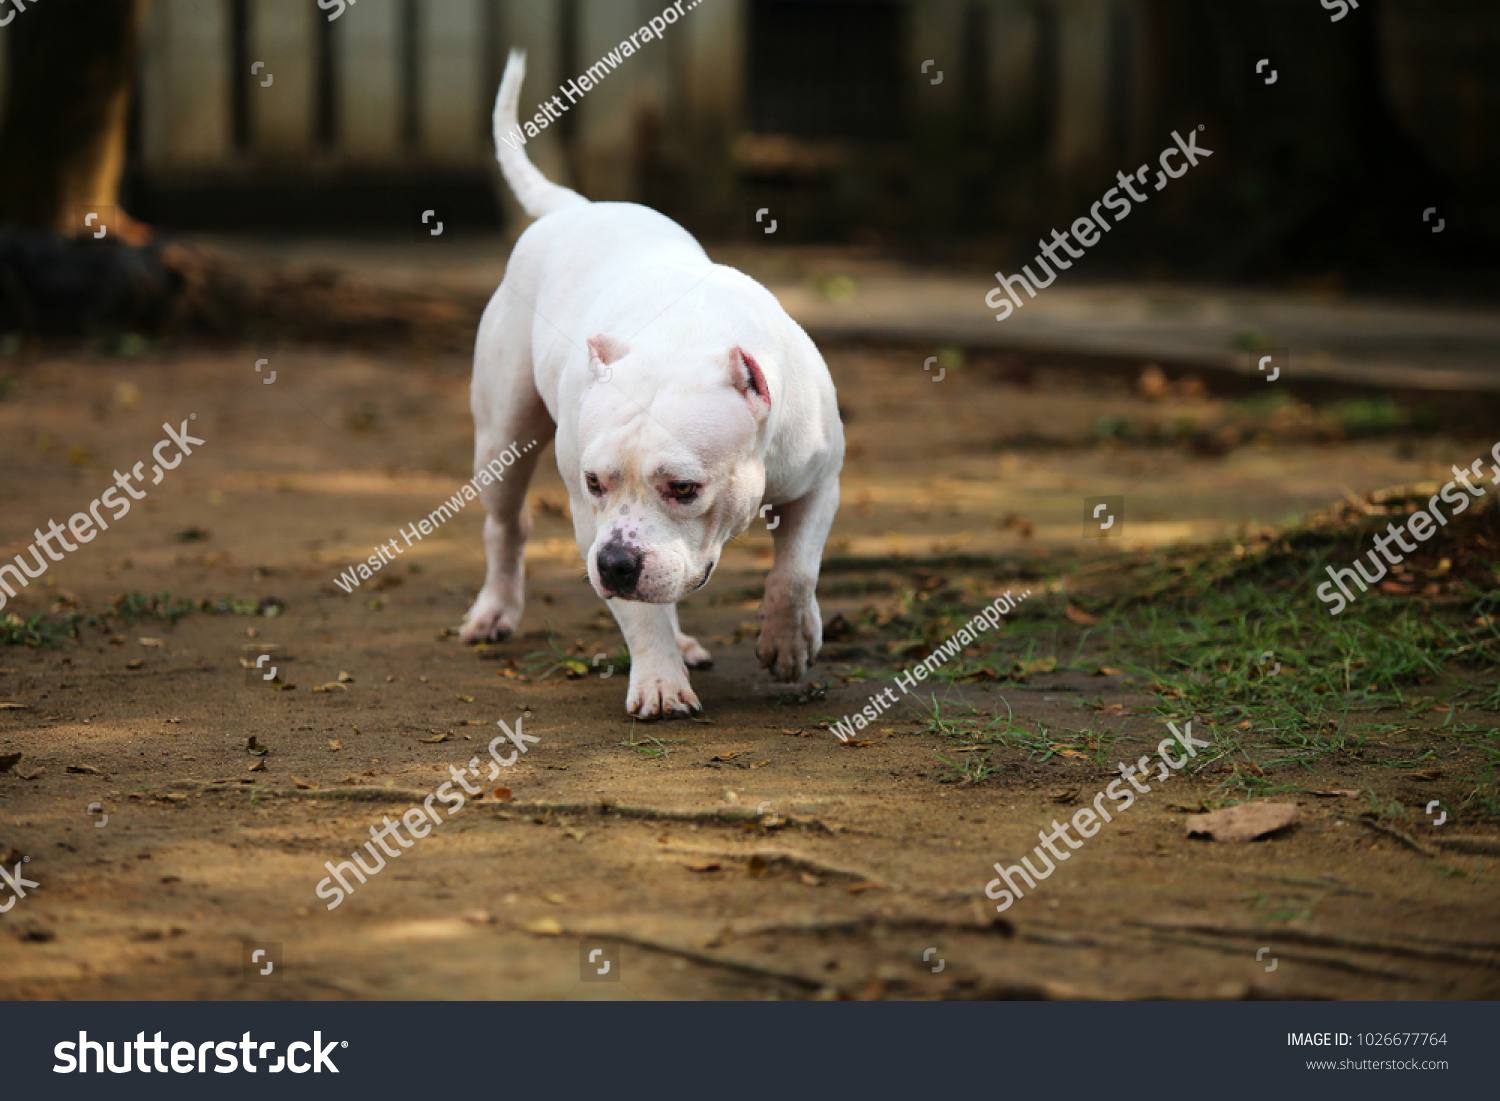 American Pit Bull Terrier American Bully Stock Photo Edit Now 1026677764